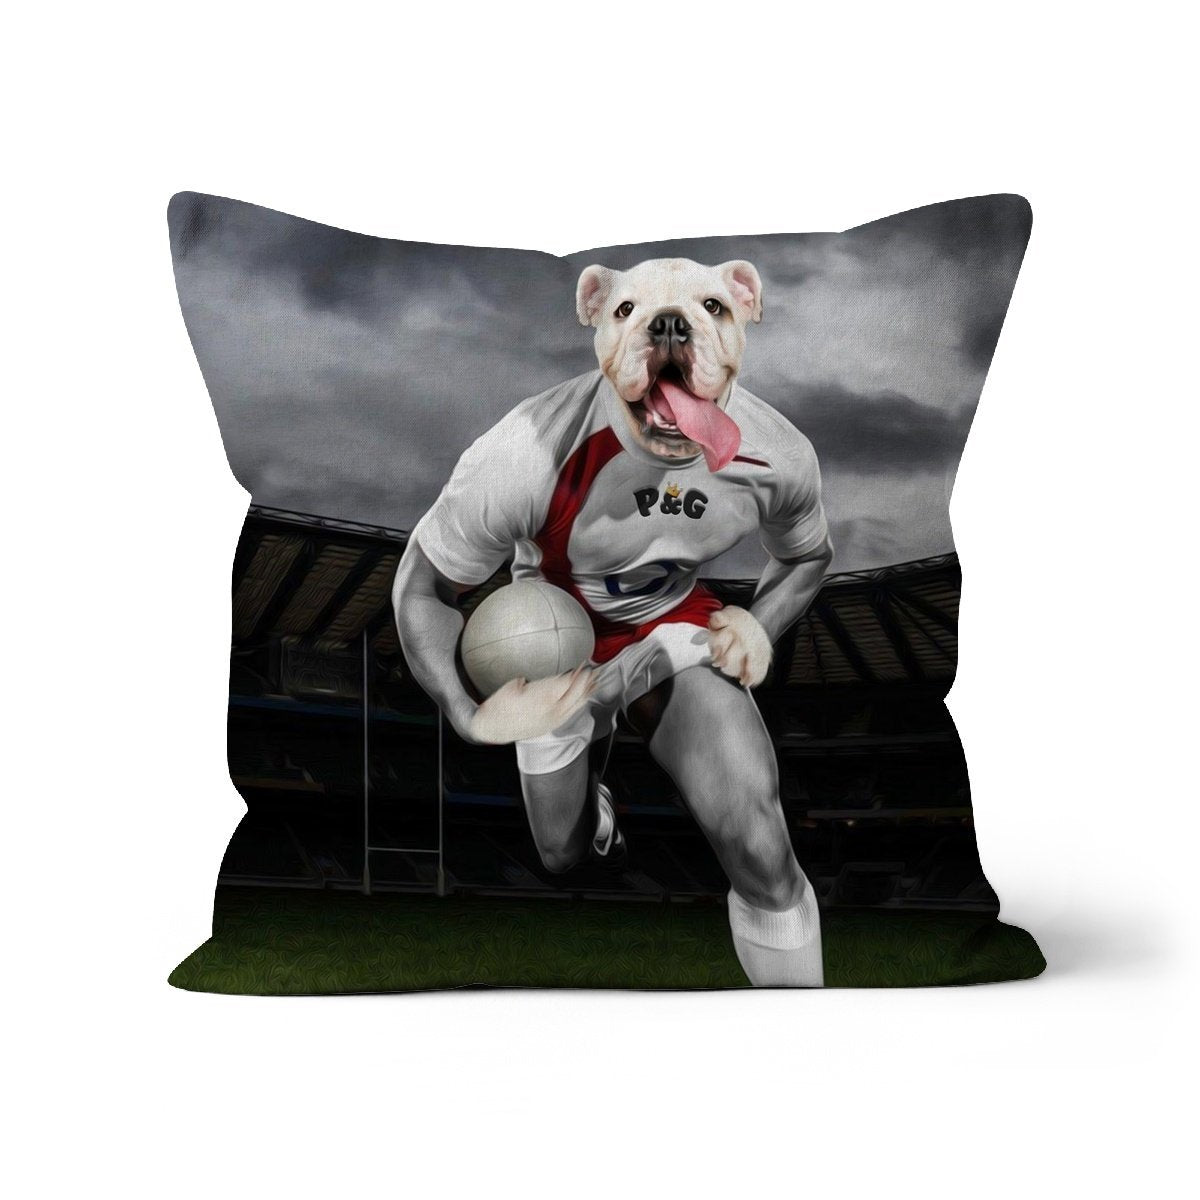 The Rugby Winger: Custom Pet Cushion - Paw & Glory - #pet portraits# - #dog portraits# - #pet portraits uk#paw & glory, pet portraits pillow,pet face pillows, personalised pet pillows, pillows with dogs picture, custom pet pillows, pet print pillow